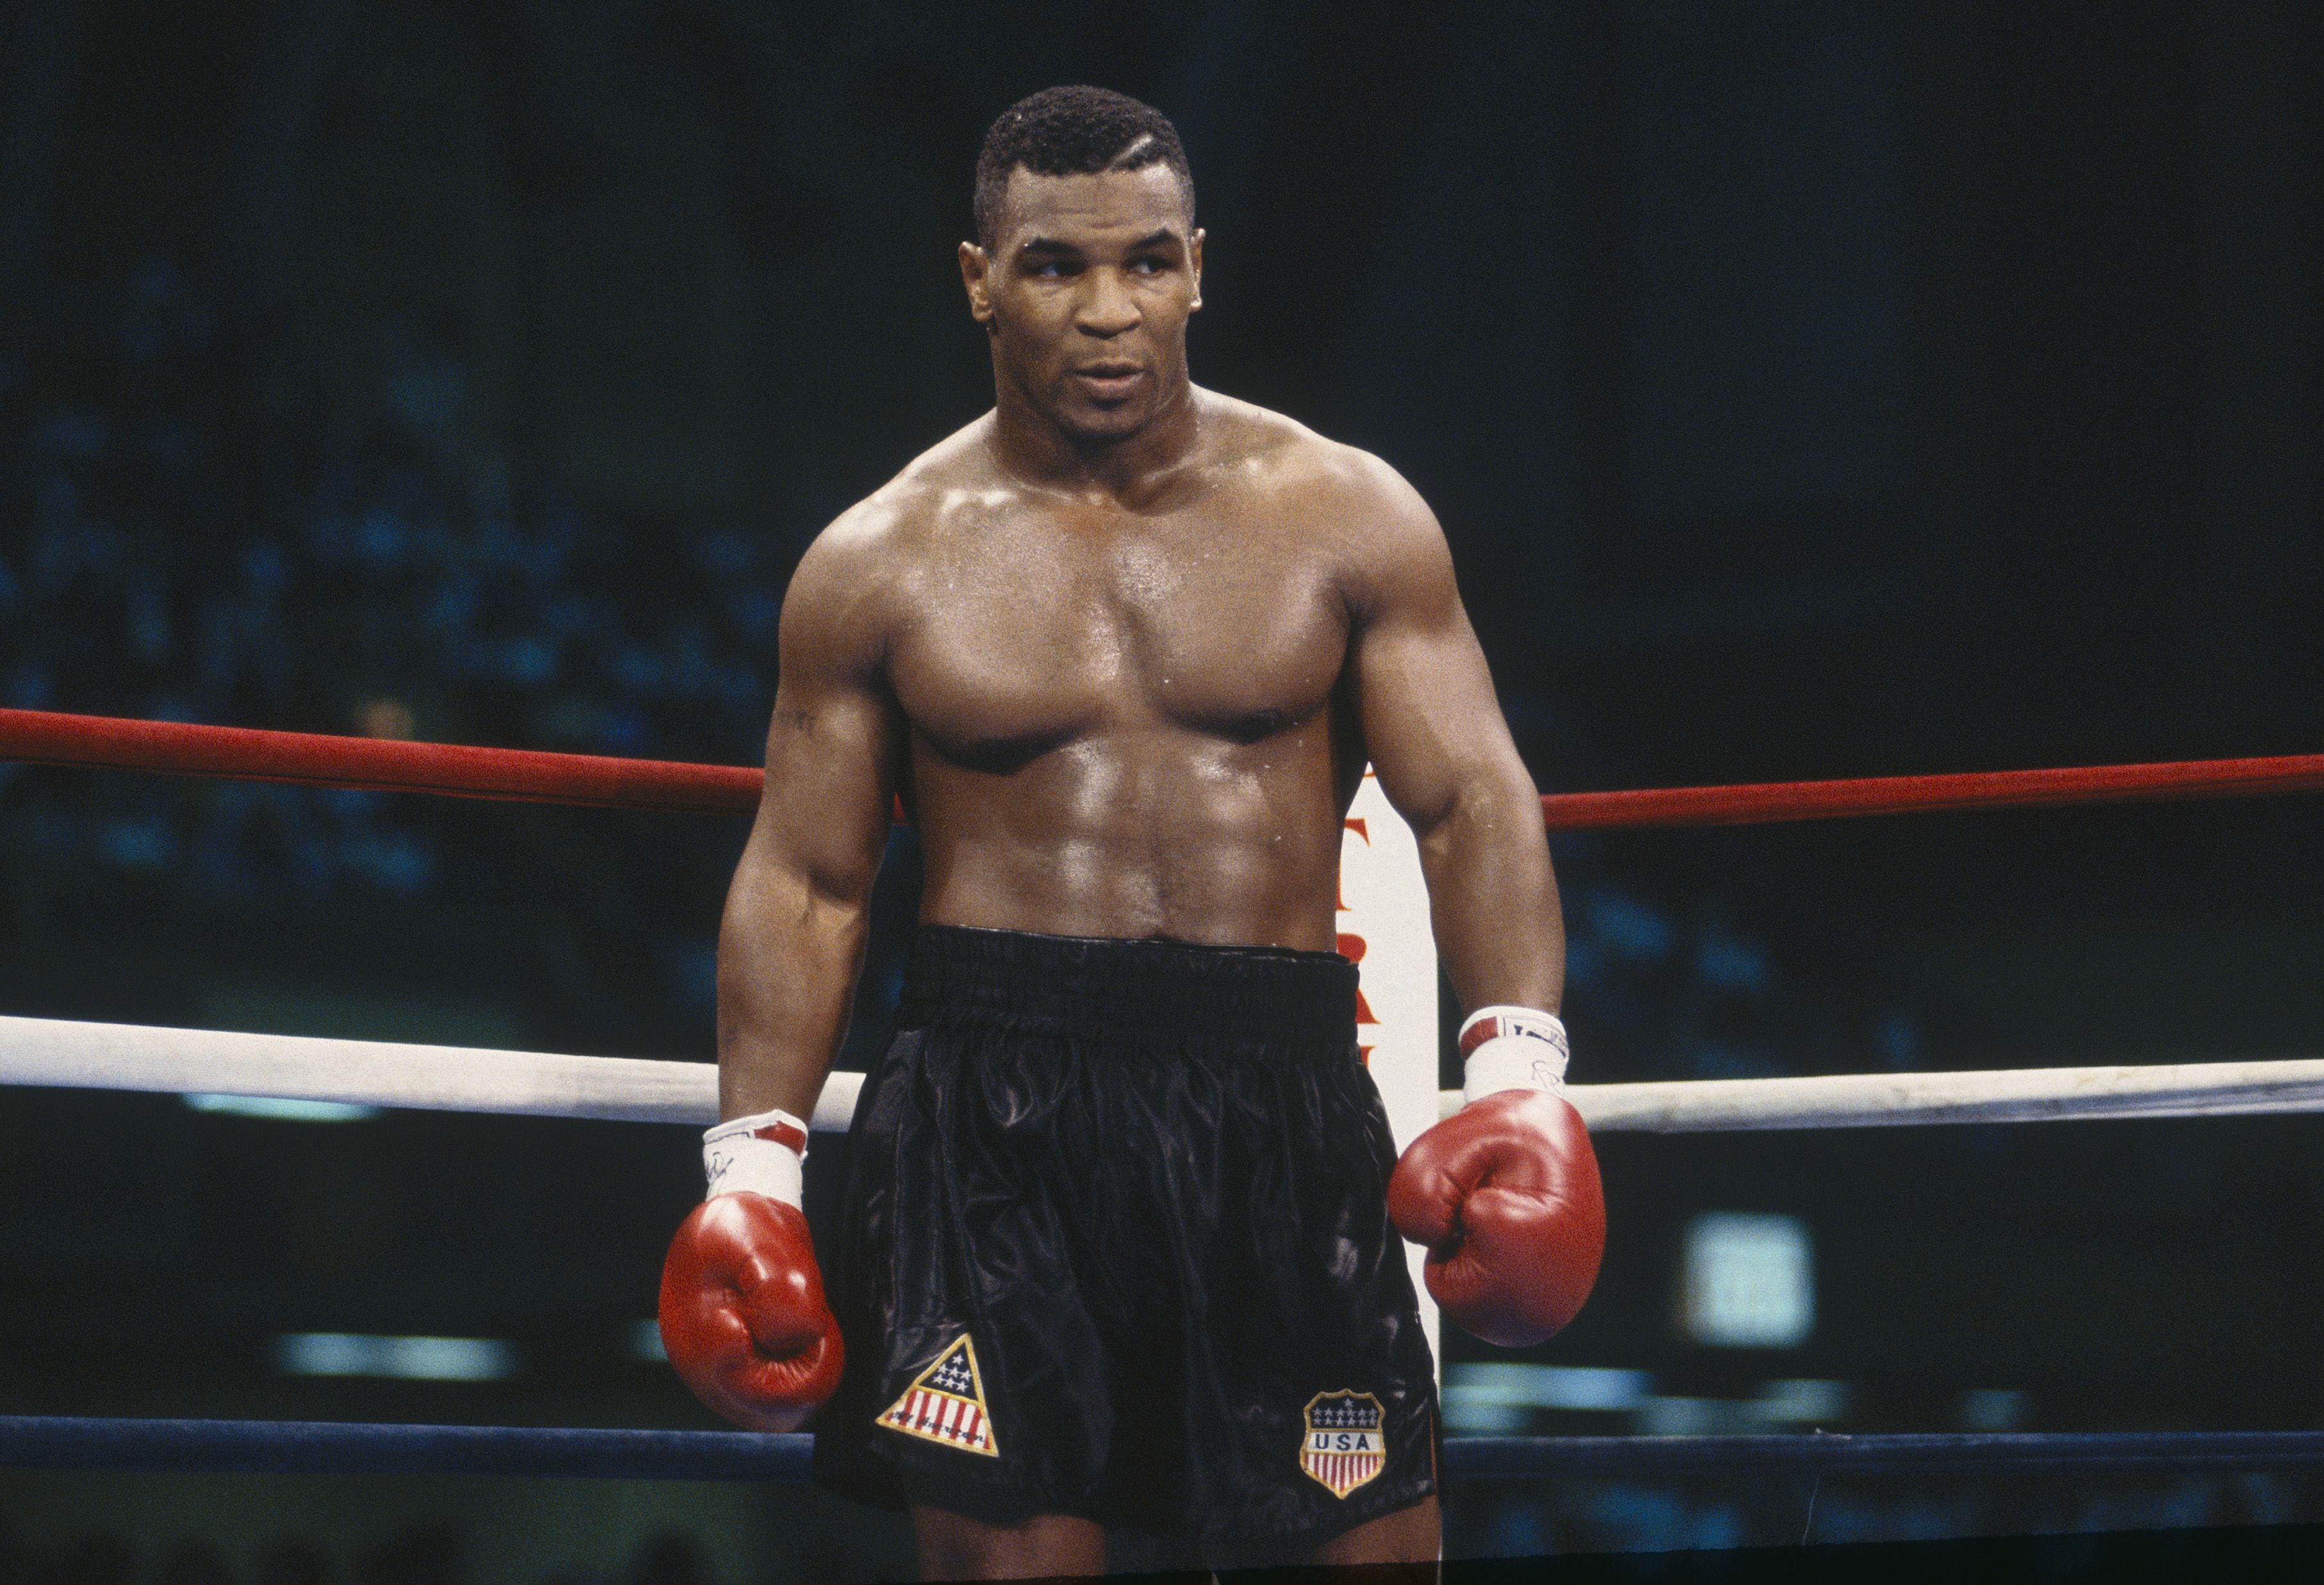 mike-tyson-stands-in-the-ring-during-the-fight-with-carl-news-photo-1588578940